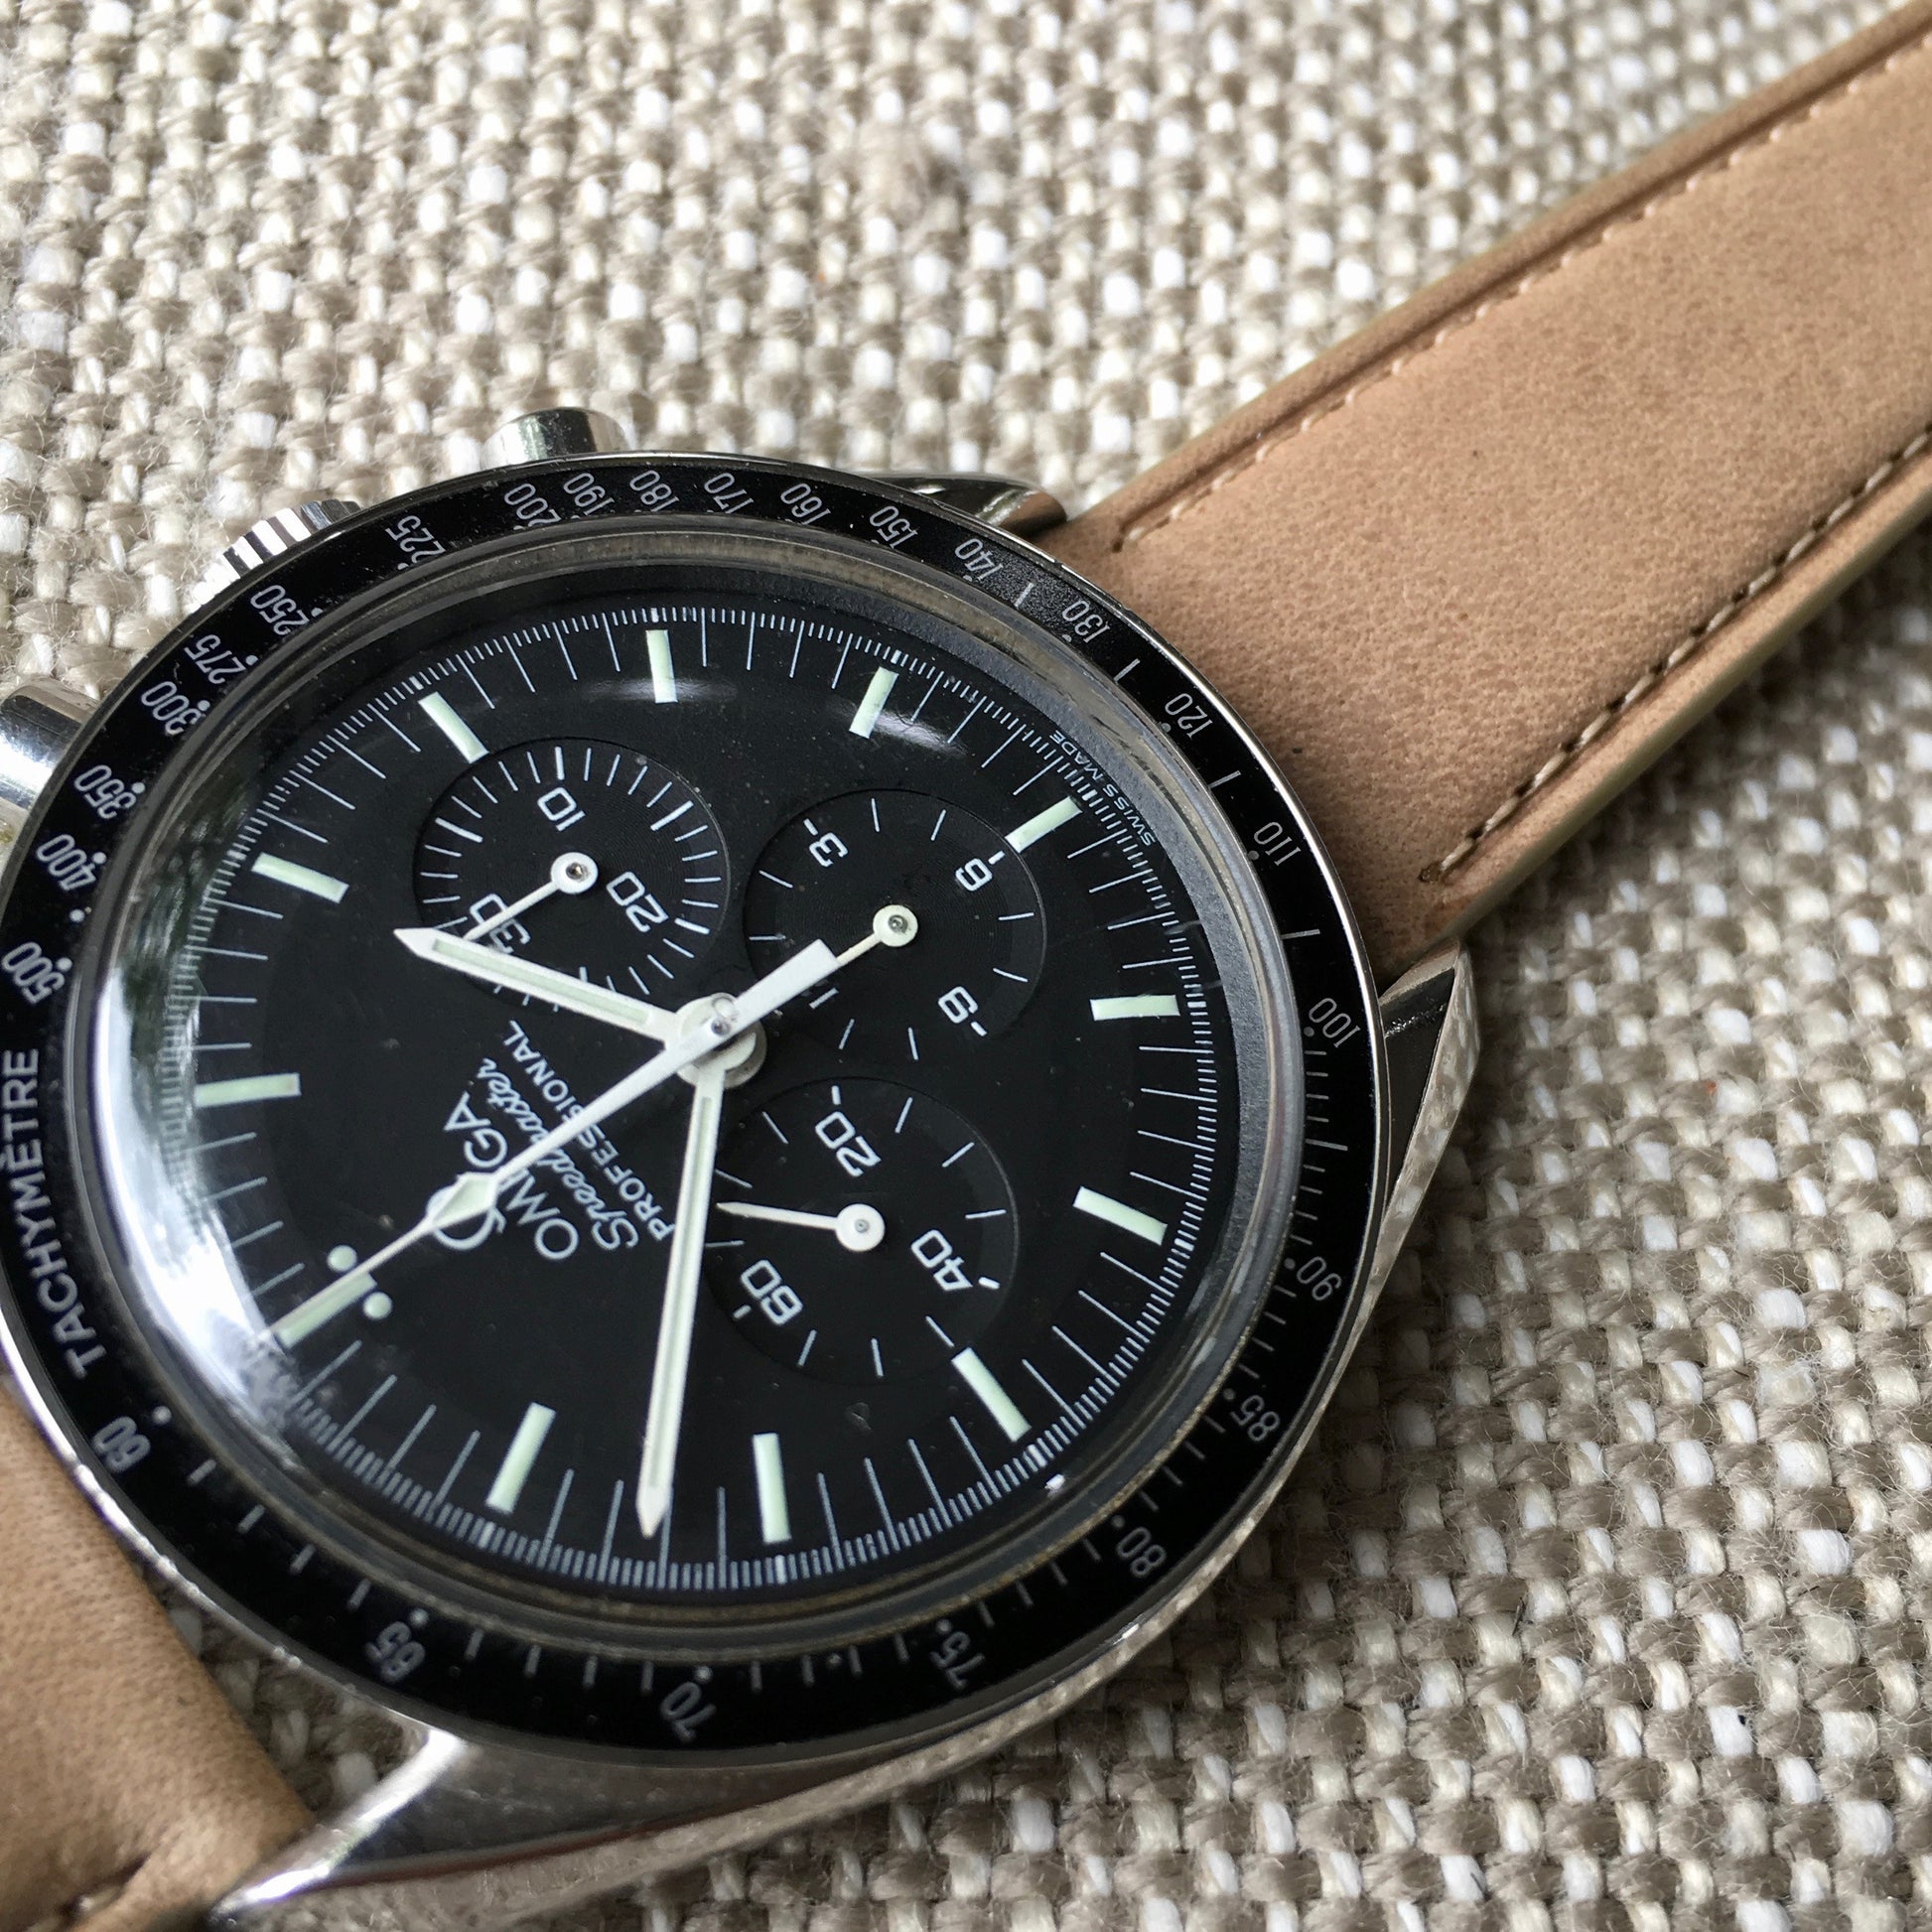 Vintage Omega Speedmaster 145.022 ST Moon Watch Transitional Cal. 861 Circa 1969 Watch - Hashtag Watch Company